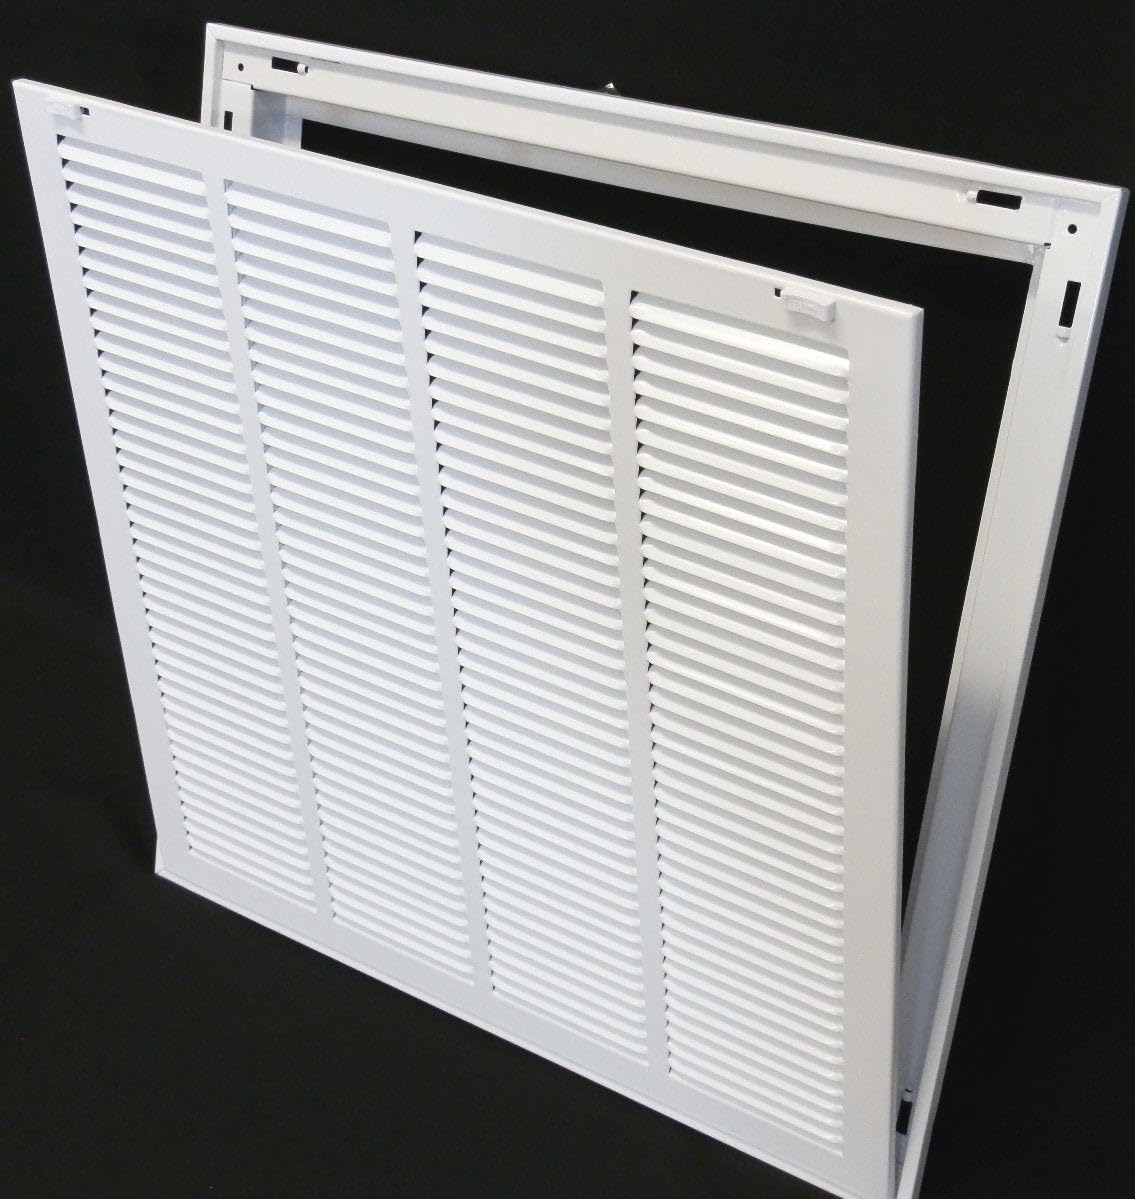 20&quot; X 40&quot; Steel Return Air Filter Grille for 1&quot; Filter - Removable Frame - [Outer Dimensions: 22 5/8&quot; X 42 5/8&quot;]